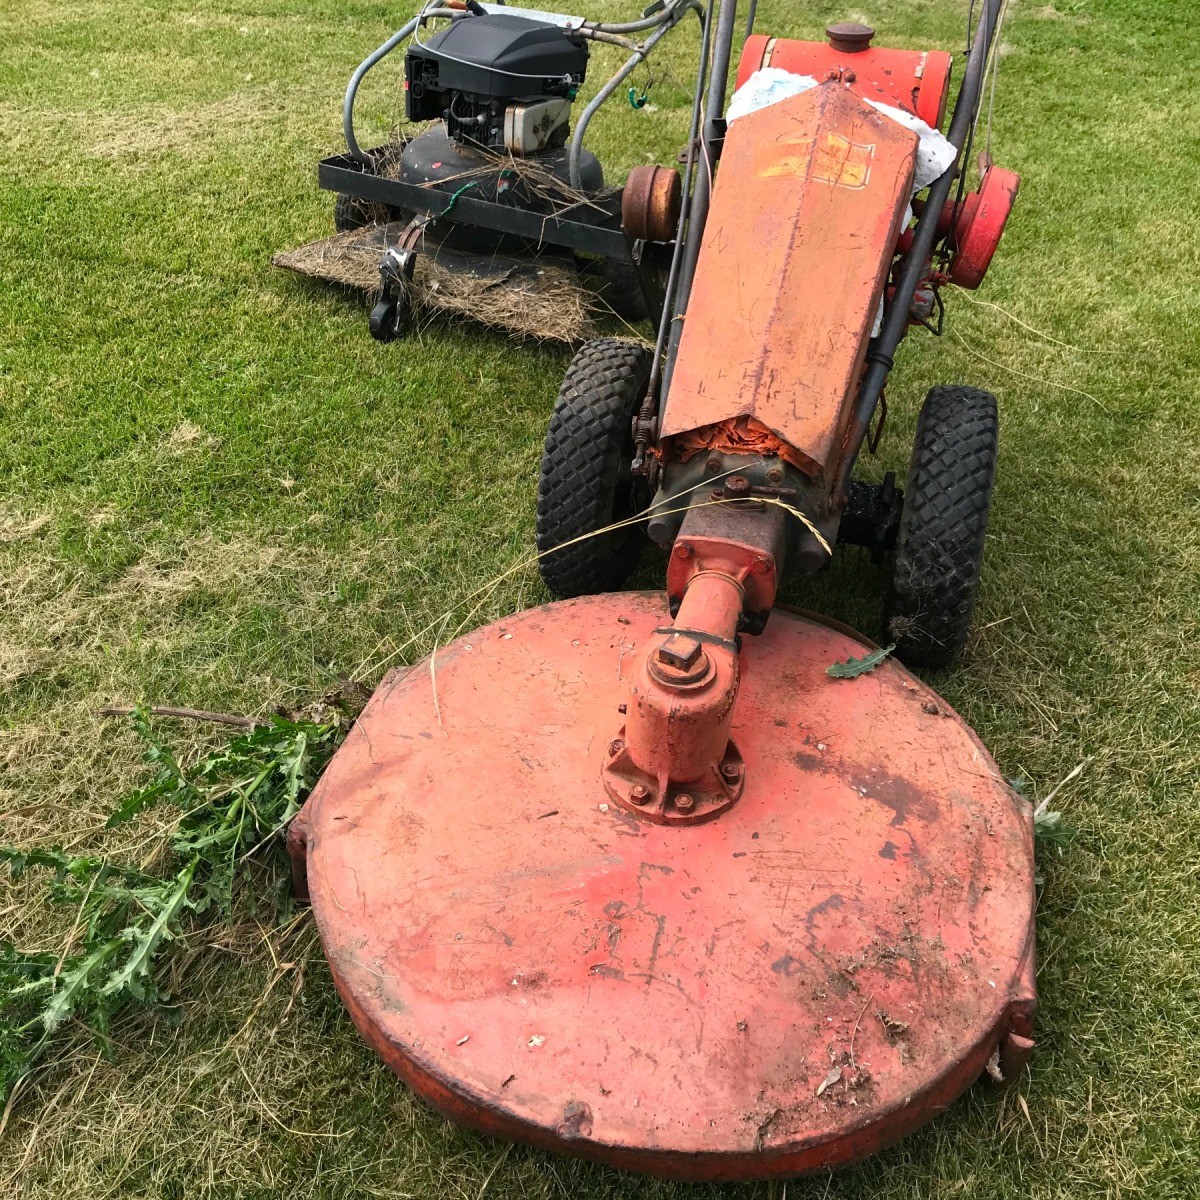 Value Of A Vintage Gravely Tractors Lawnmower Thriftyfun